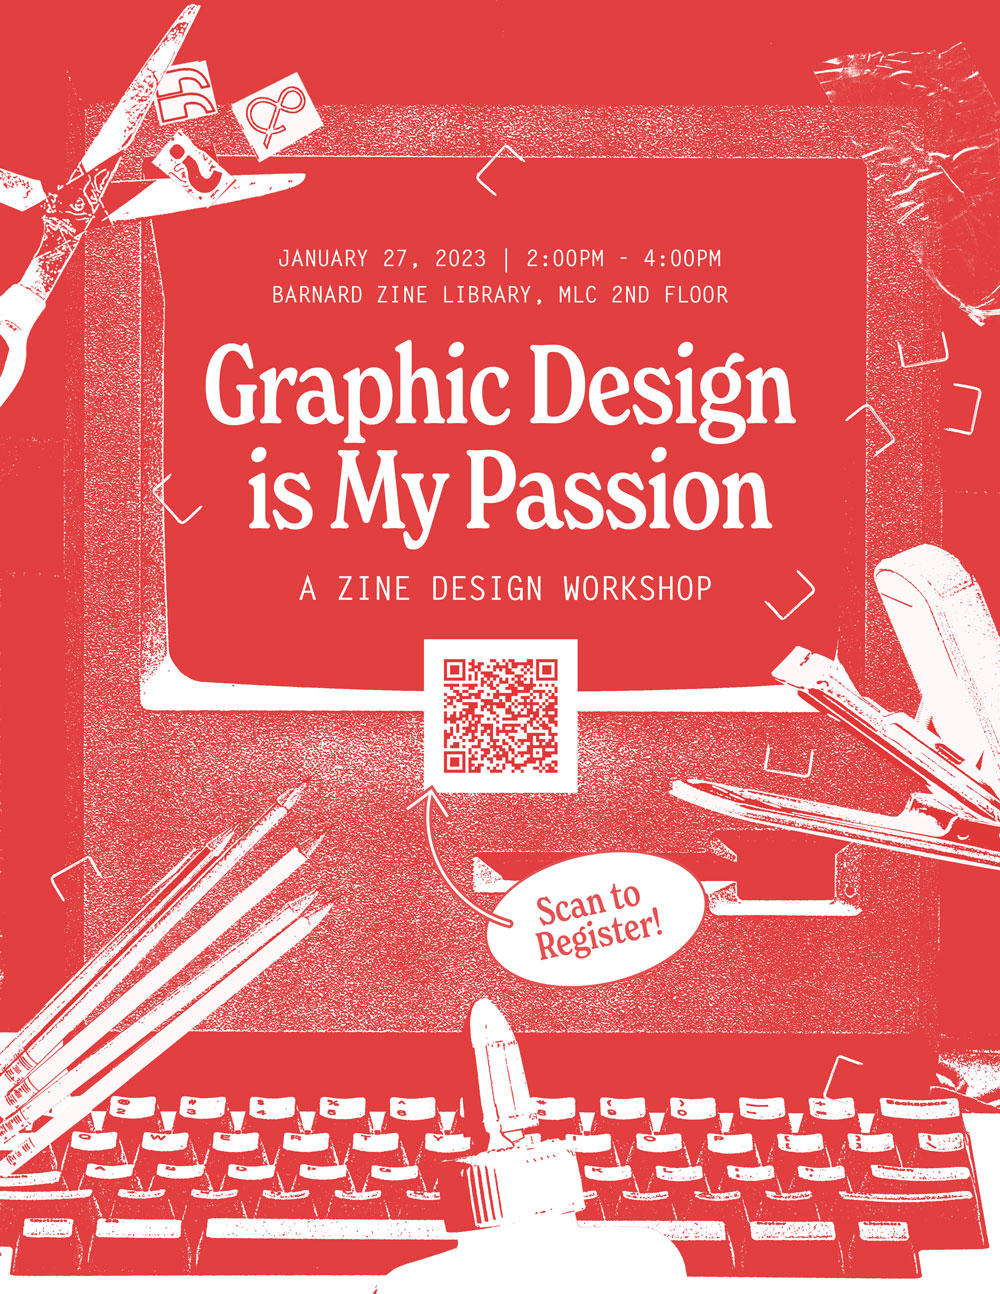 white Graphic Design Is My Passion text on red background. Surrounding elements include scissors, pens, a stapler, and a typewriter. A QR codes links to the registration page